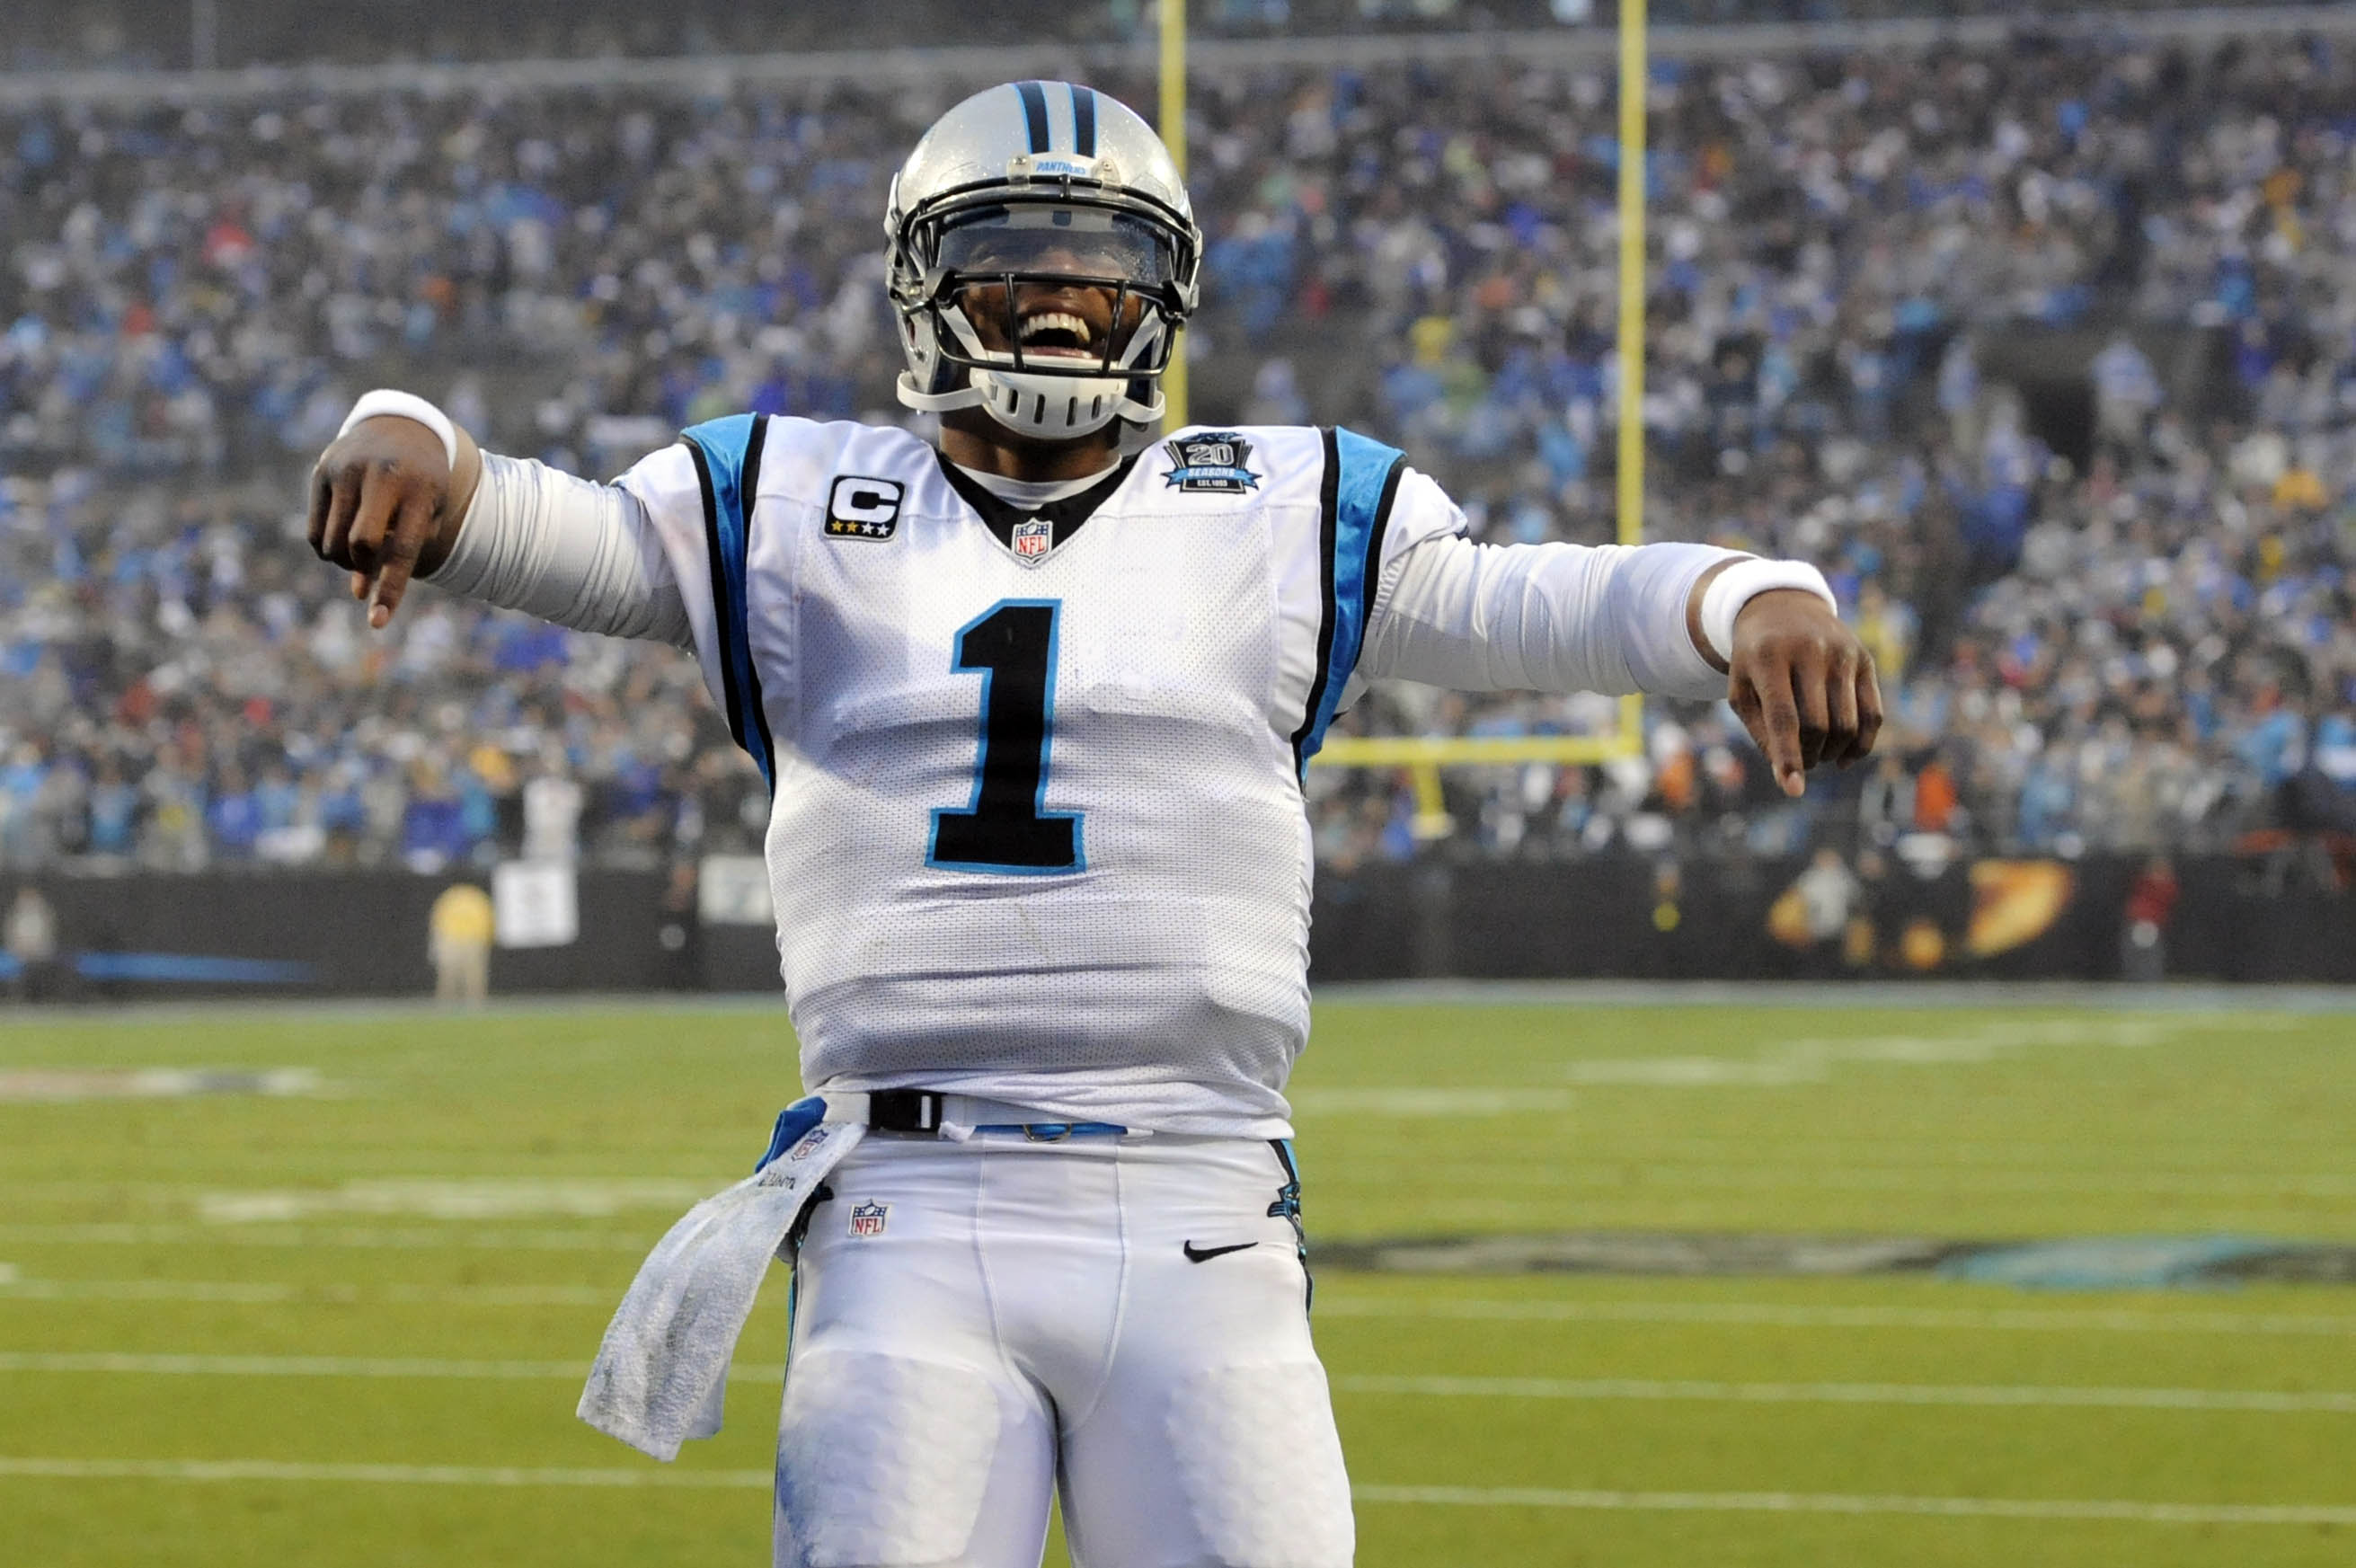 Panthers overcome sloppy start to survive Cardinals, 27-16